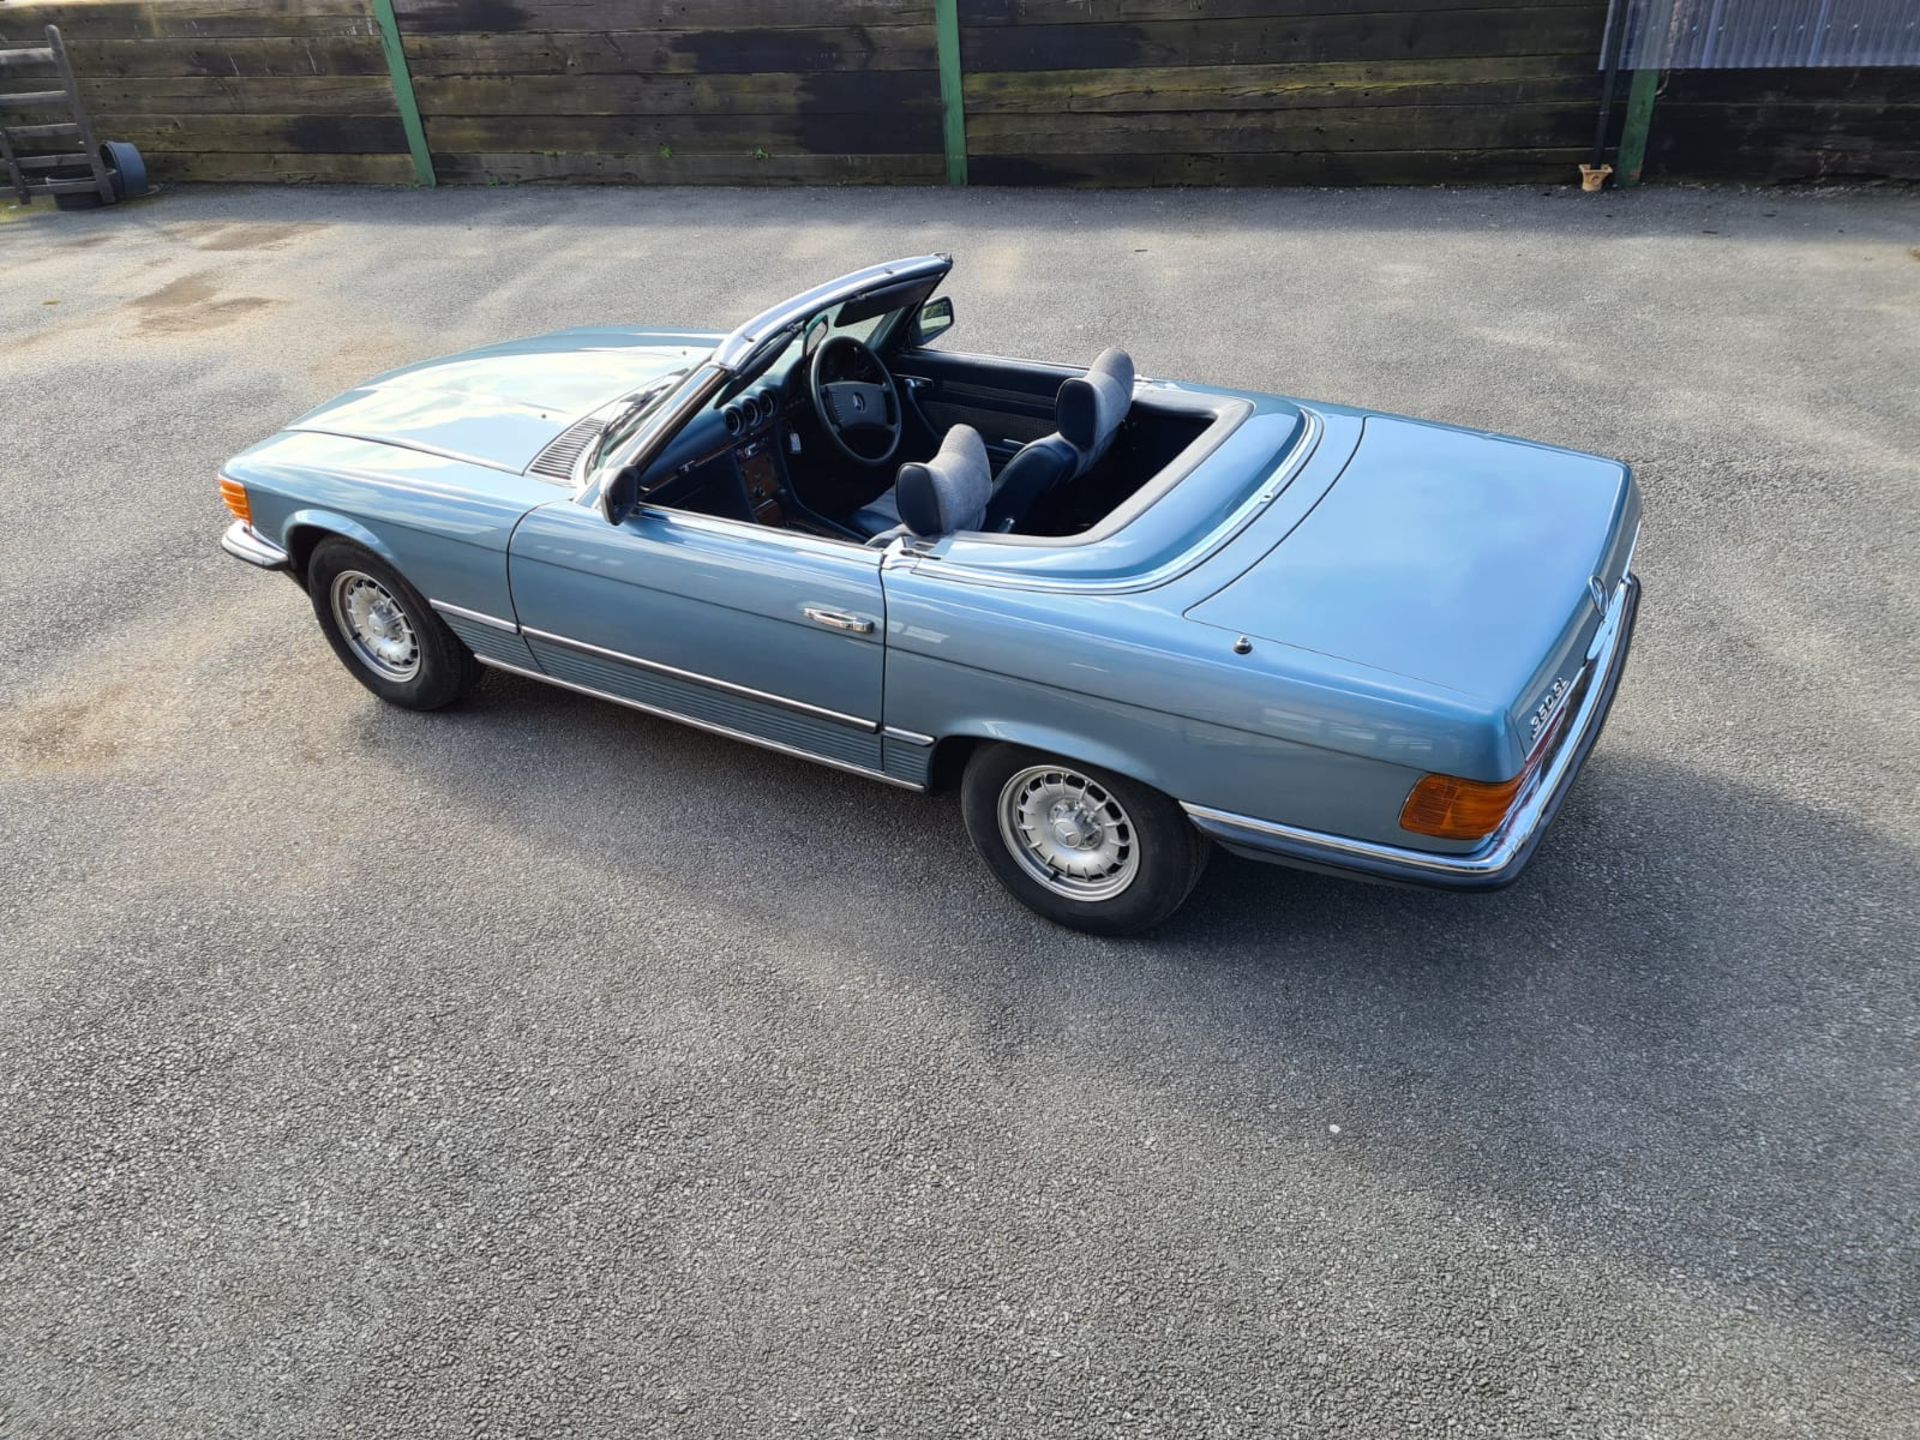 Stunning 1979 Mercedes Benz SL350 V8 With Factory Hardtop - Restored in 2018 - Image 20 of 22